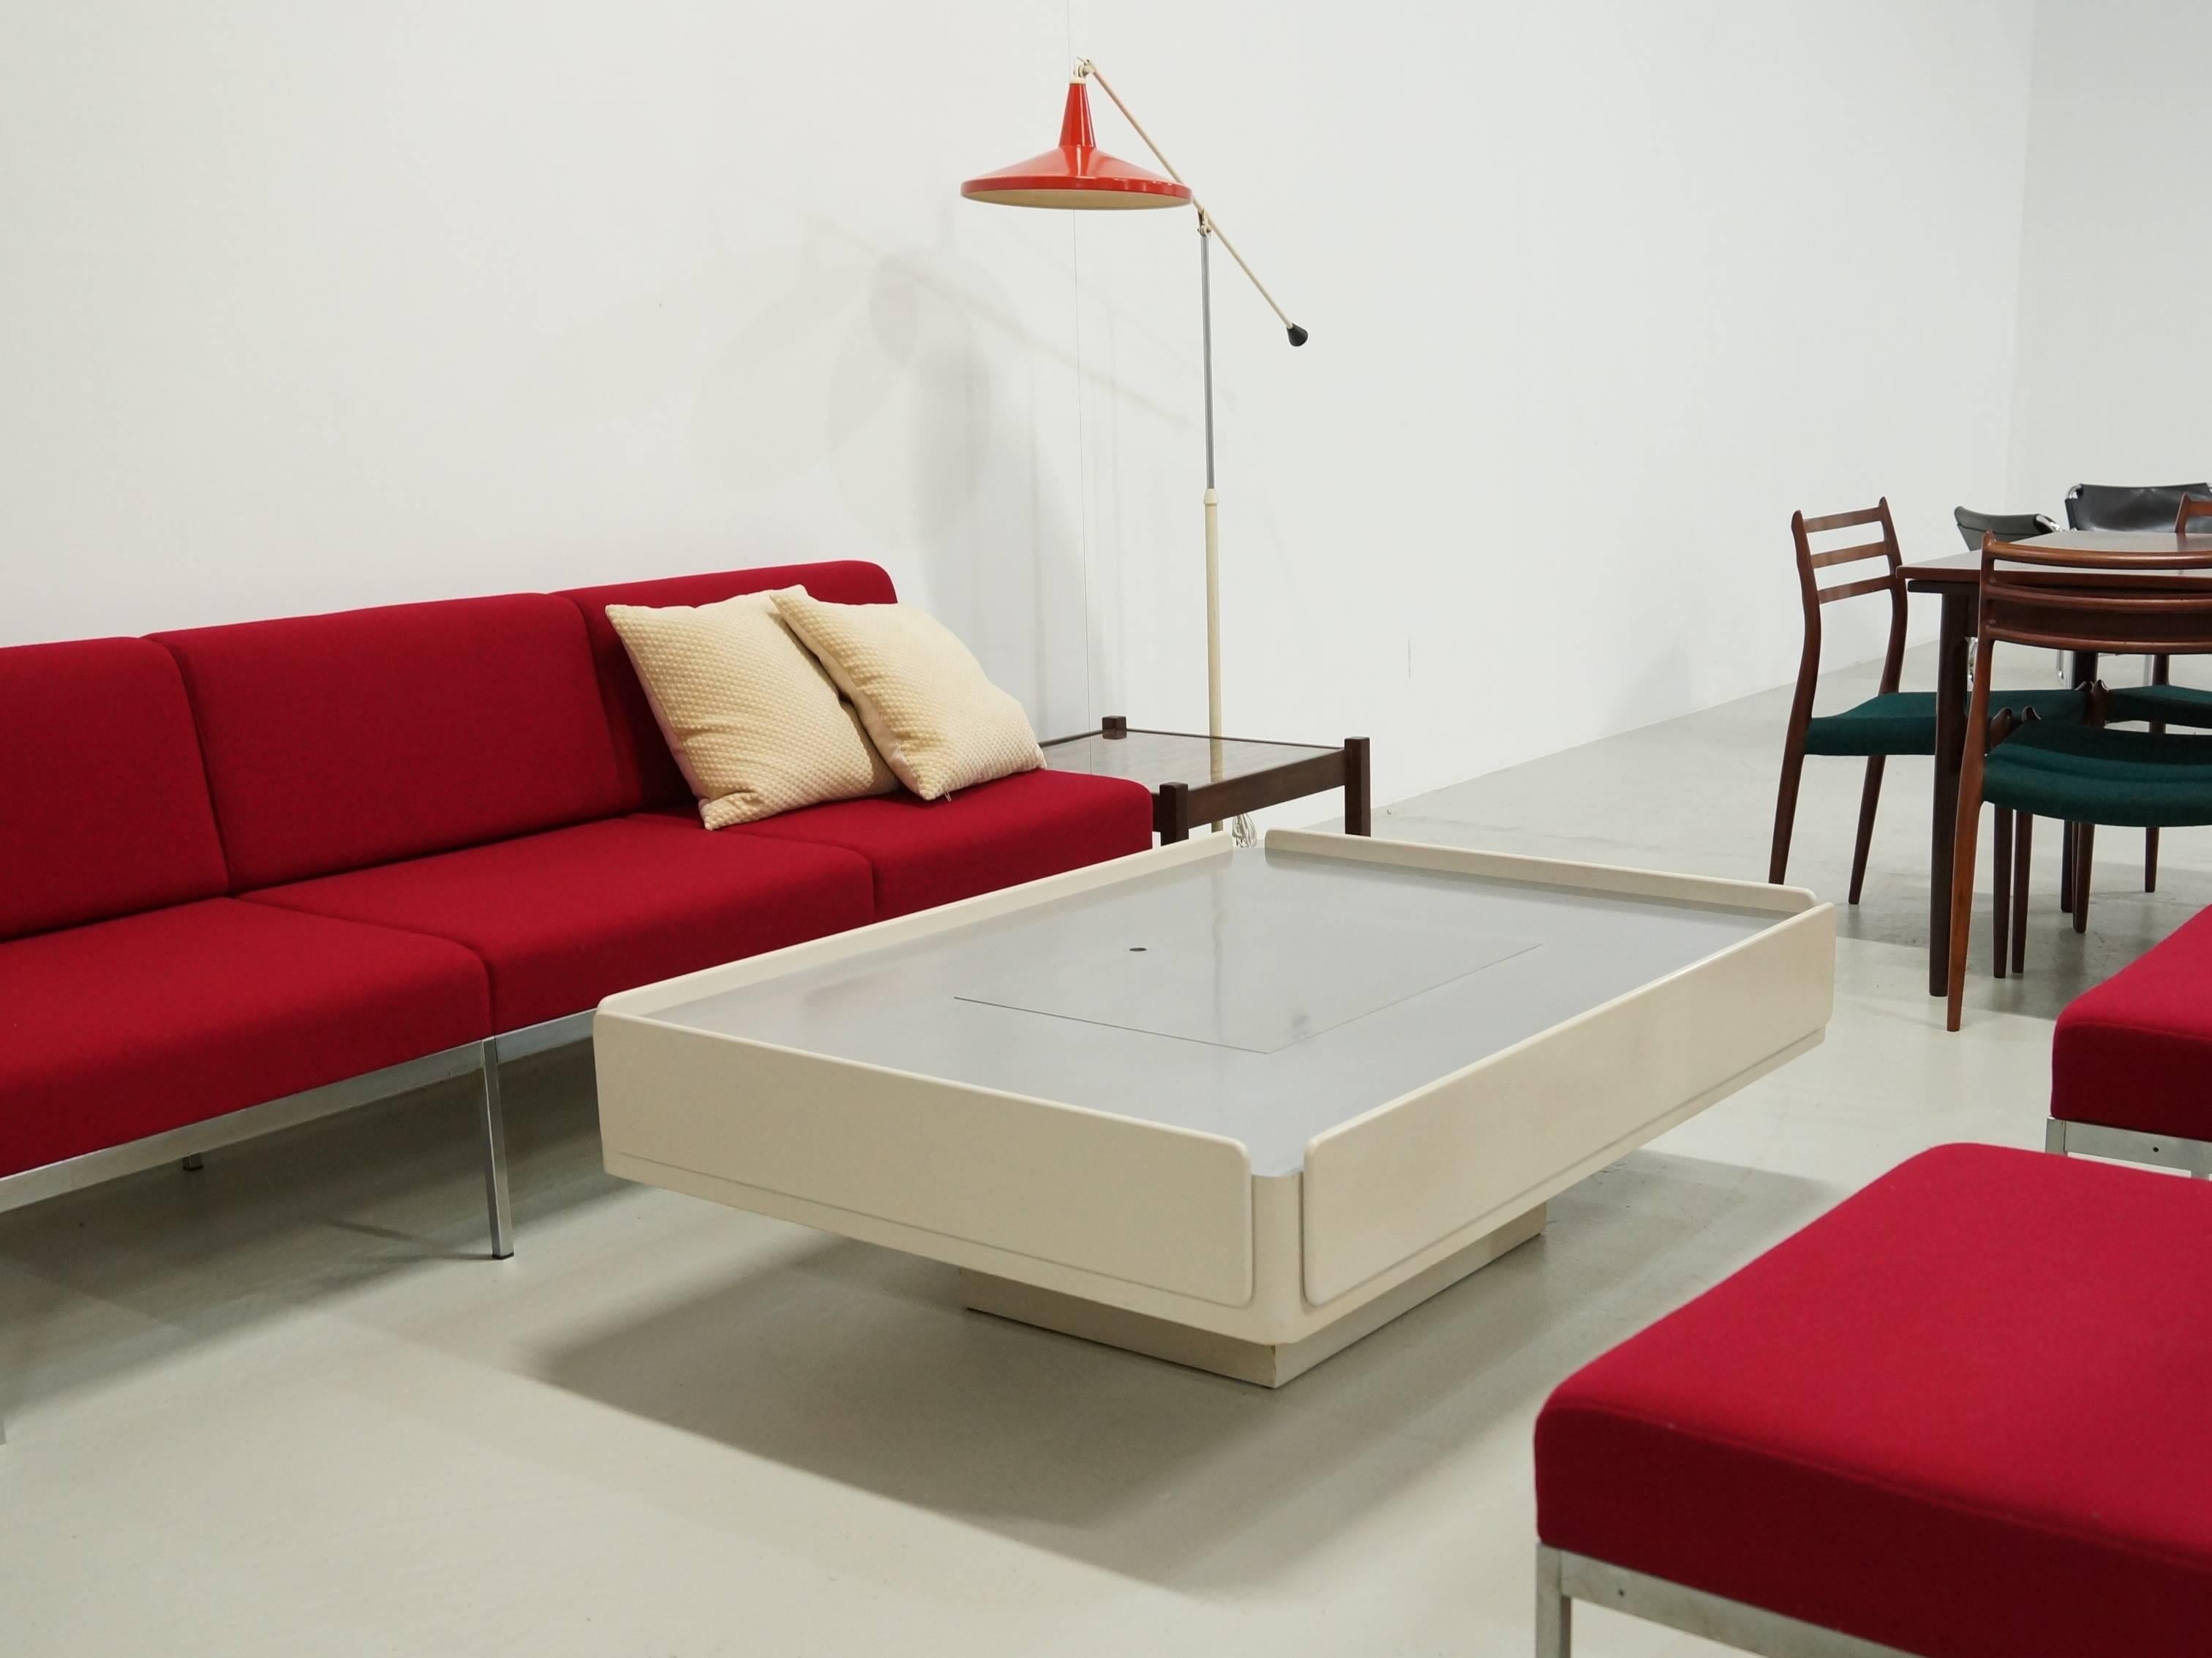 Beautiful off-white coffee table designed by Vico Magistretti model Caori with Record Storage, made by Gavina in 1962. The long sides are two fall Flaps storages and the short sides are two drawers. The stainless steel top contains a storage space